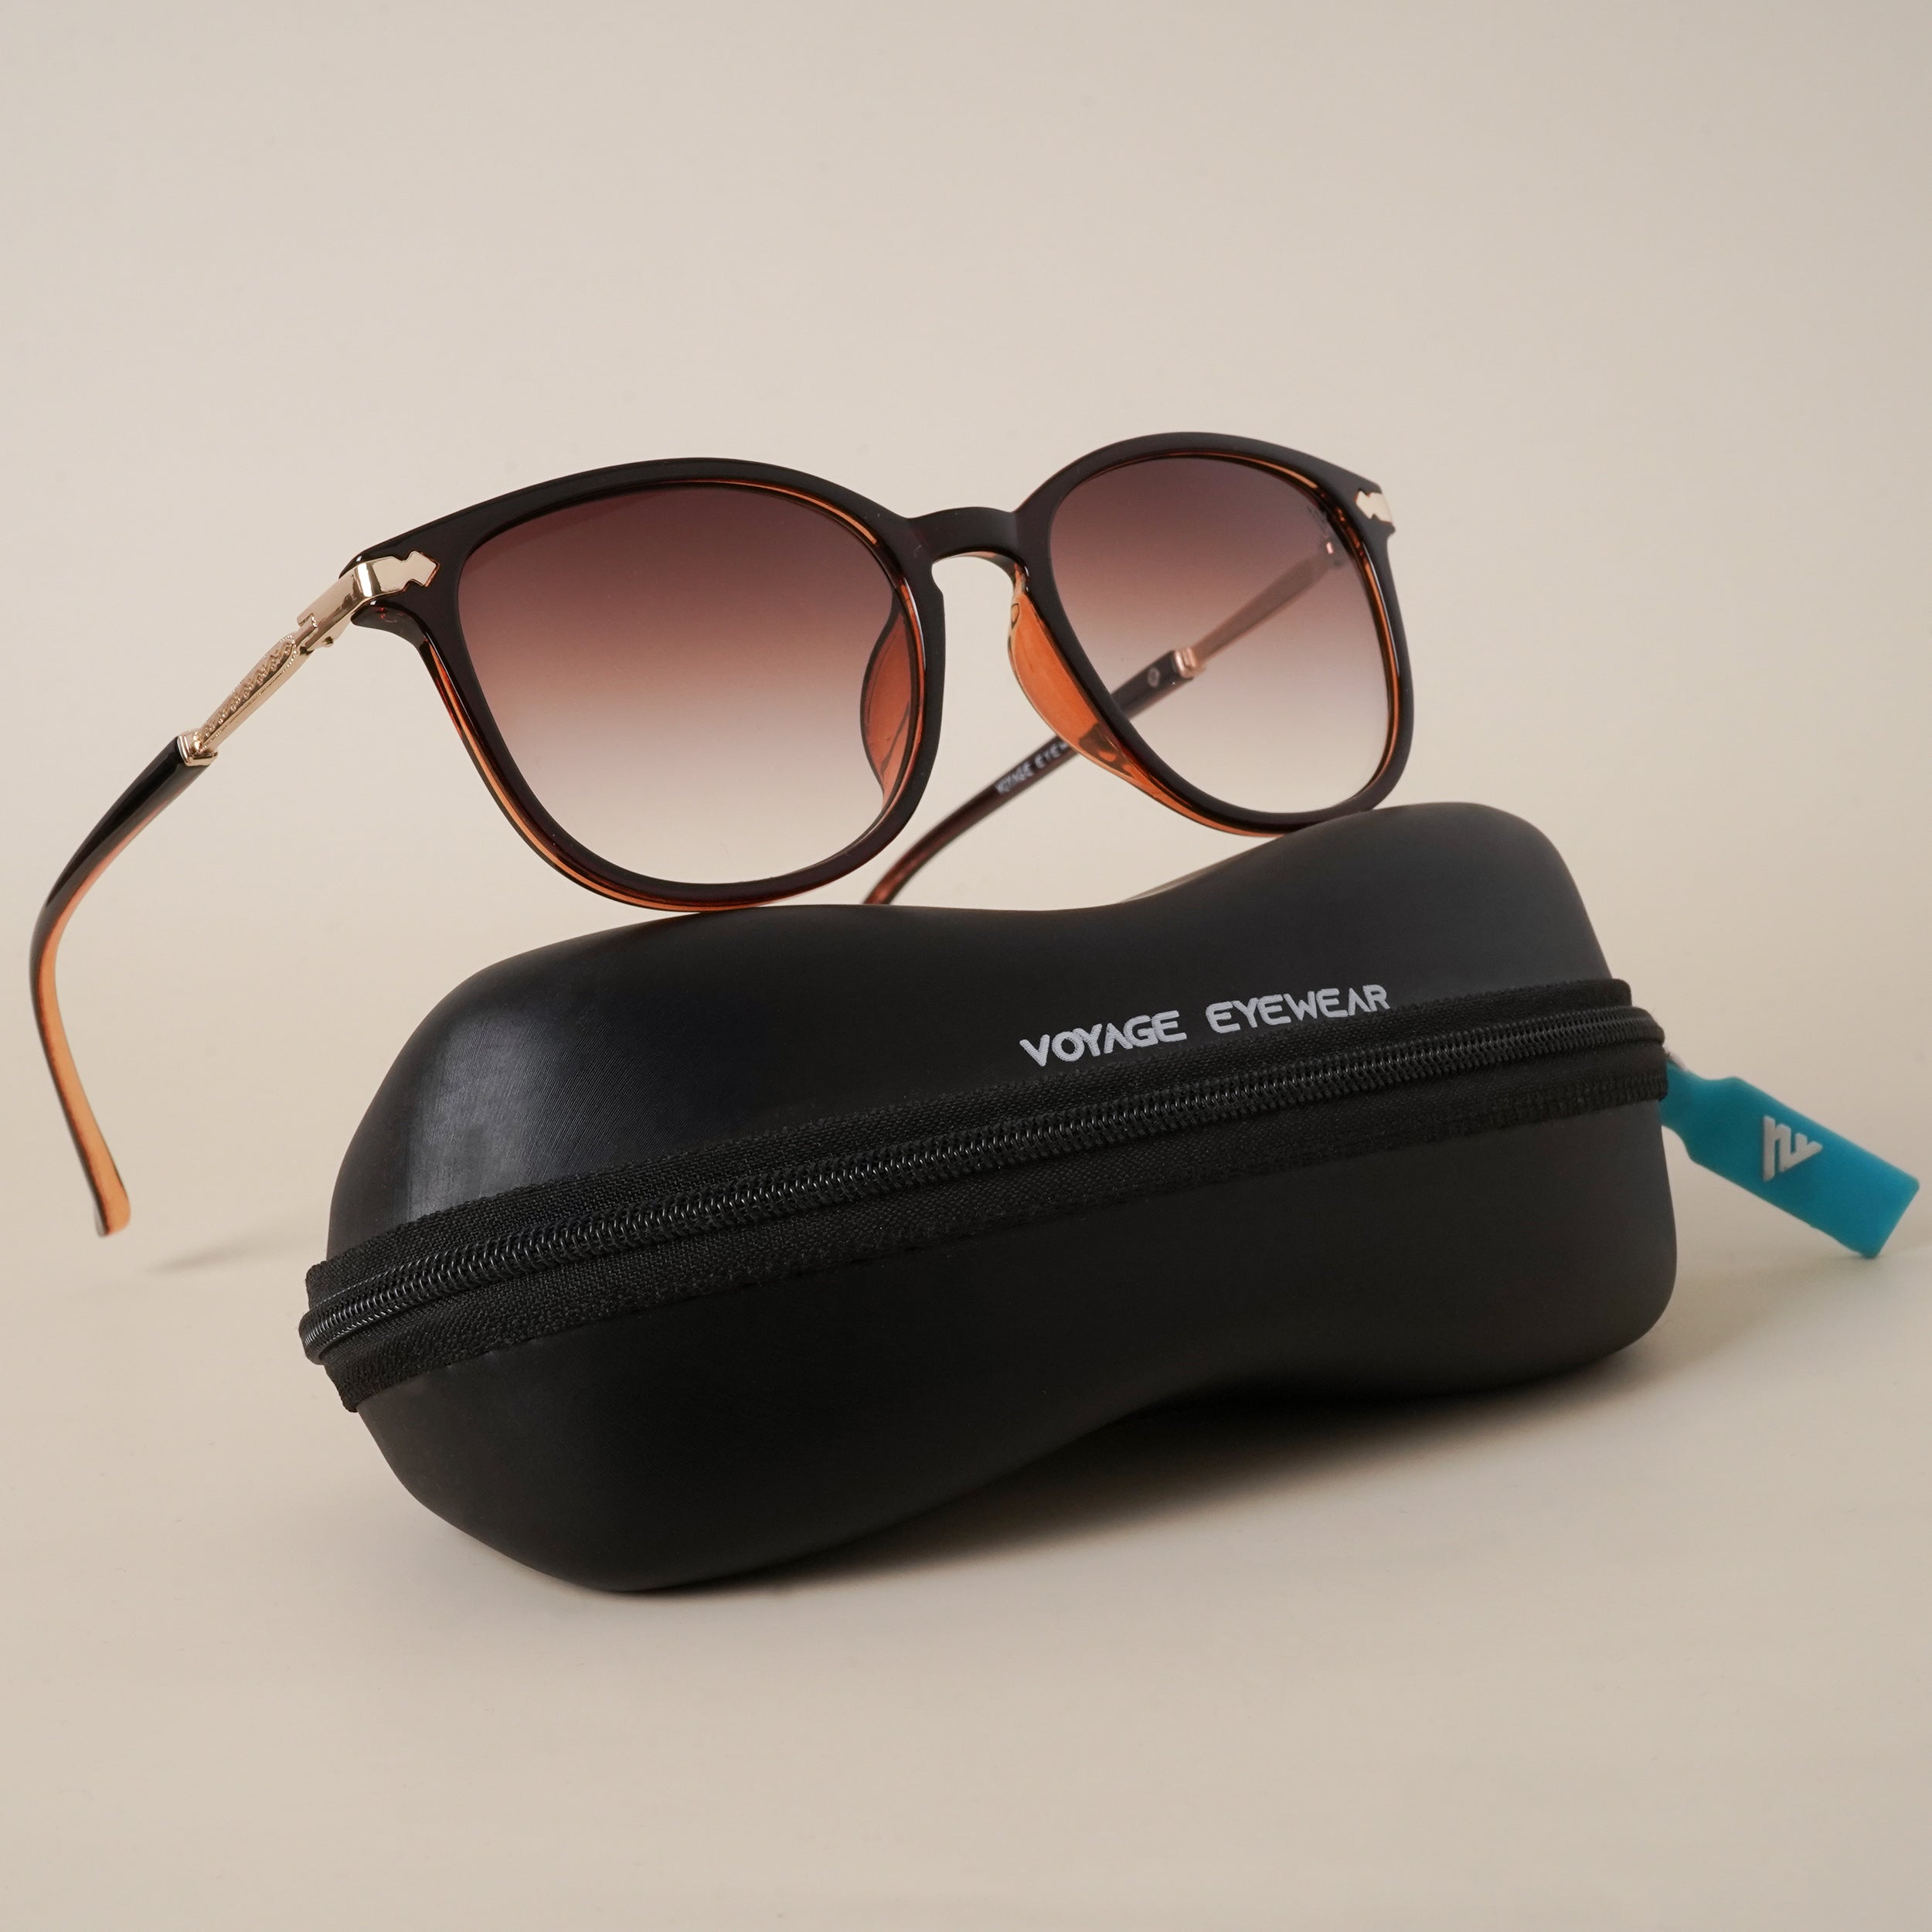 Voyage Brown Over Size Sunglasses MG3183